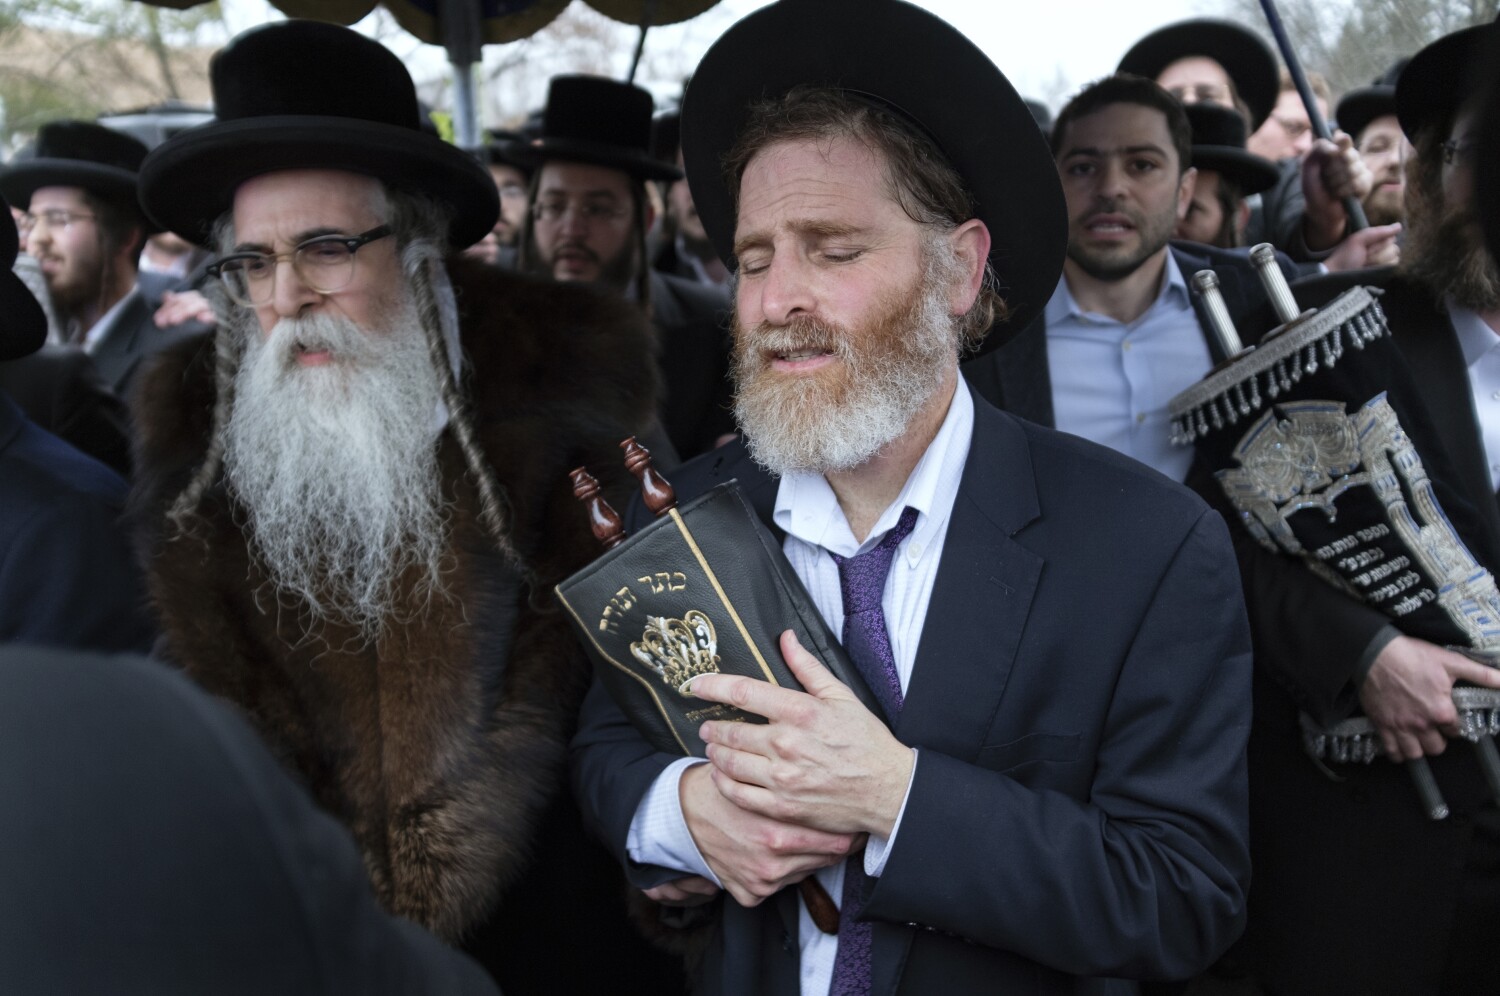 Repeated attacks on Jewish community heighten fears